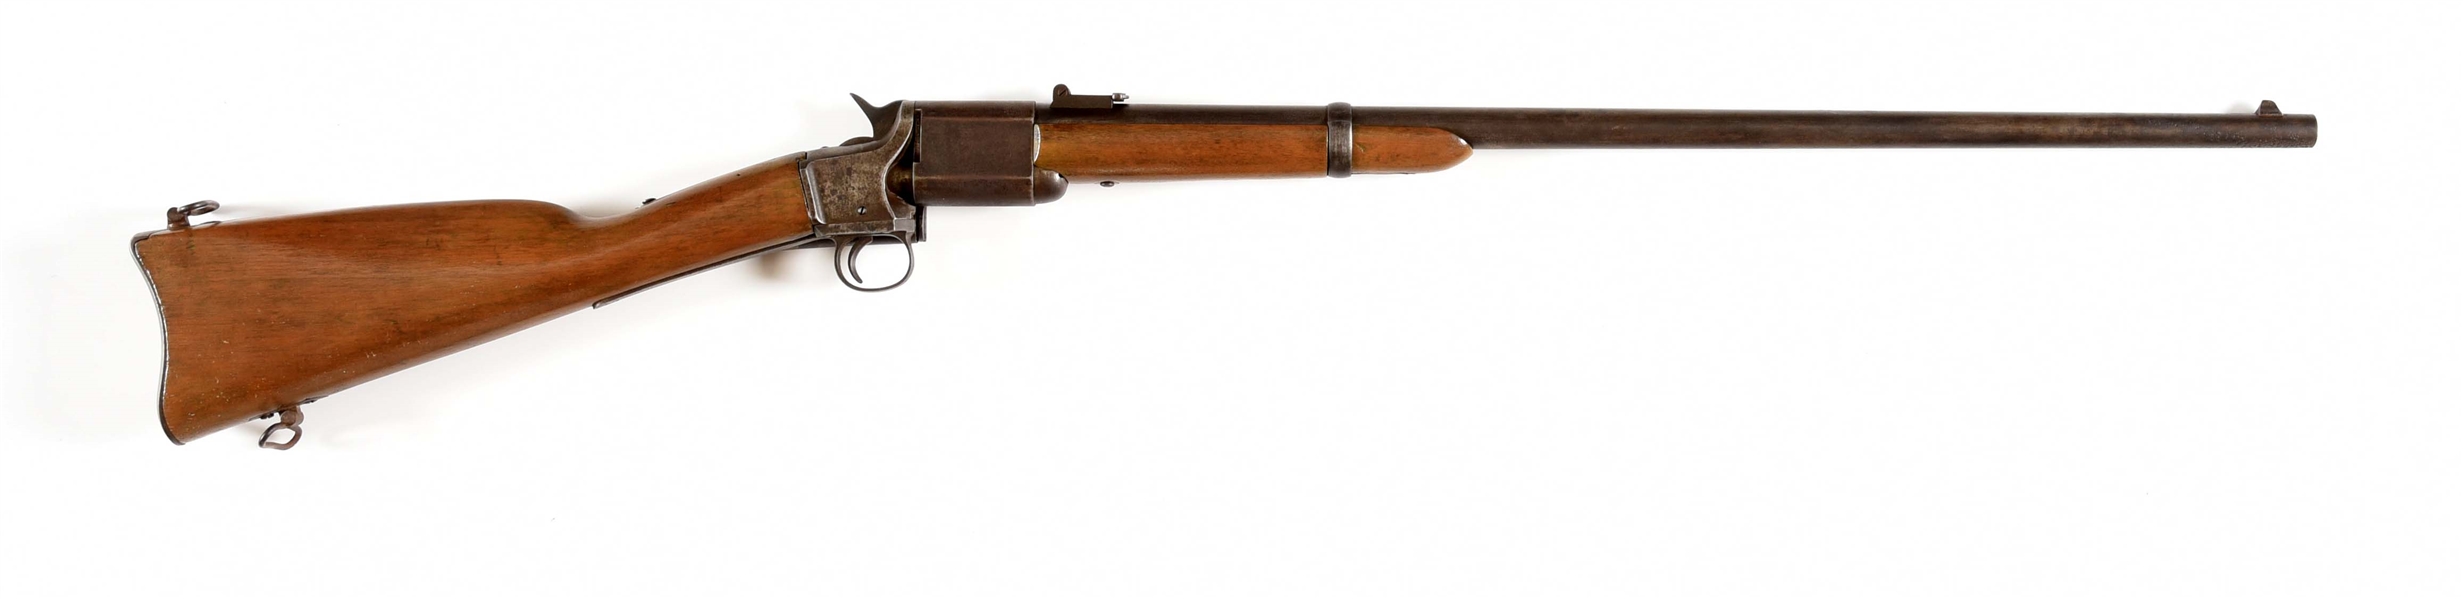 (A) MERIDEN MFG CO TWIST ACTION REPEATING RIFLE 